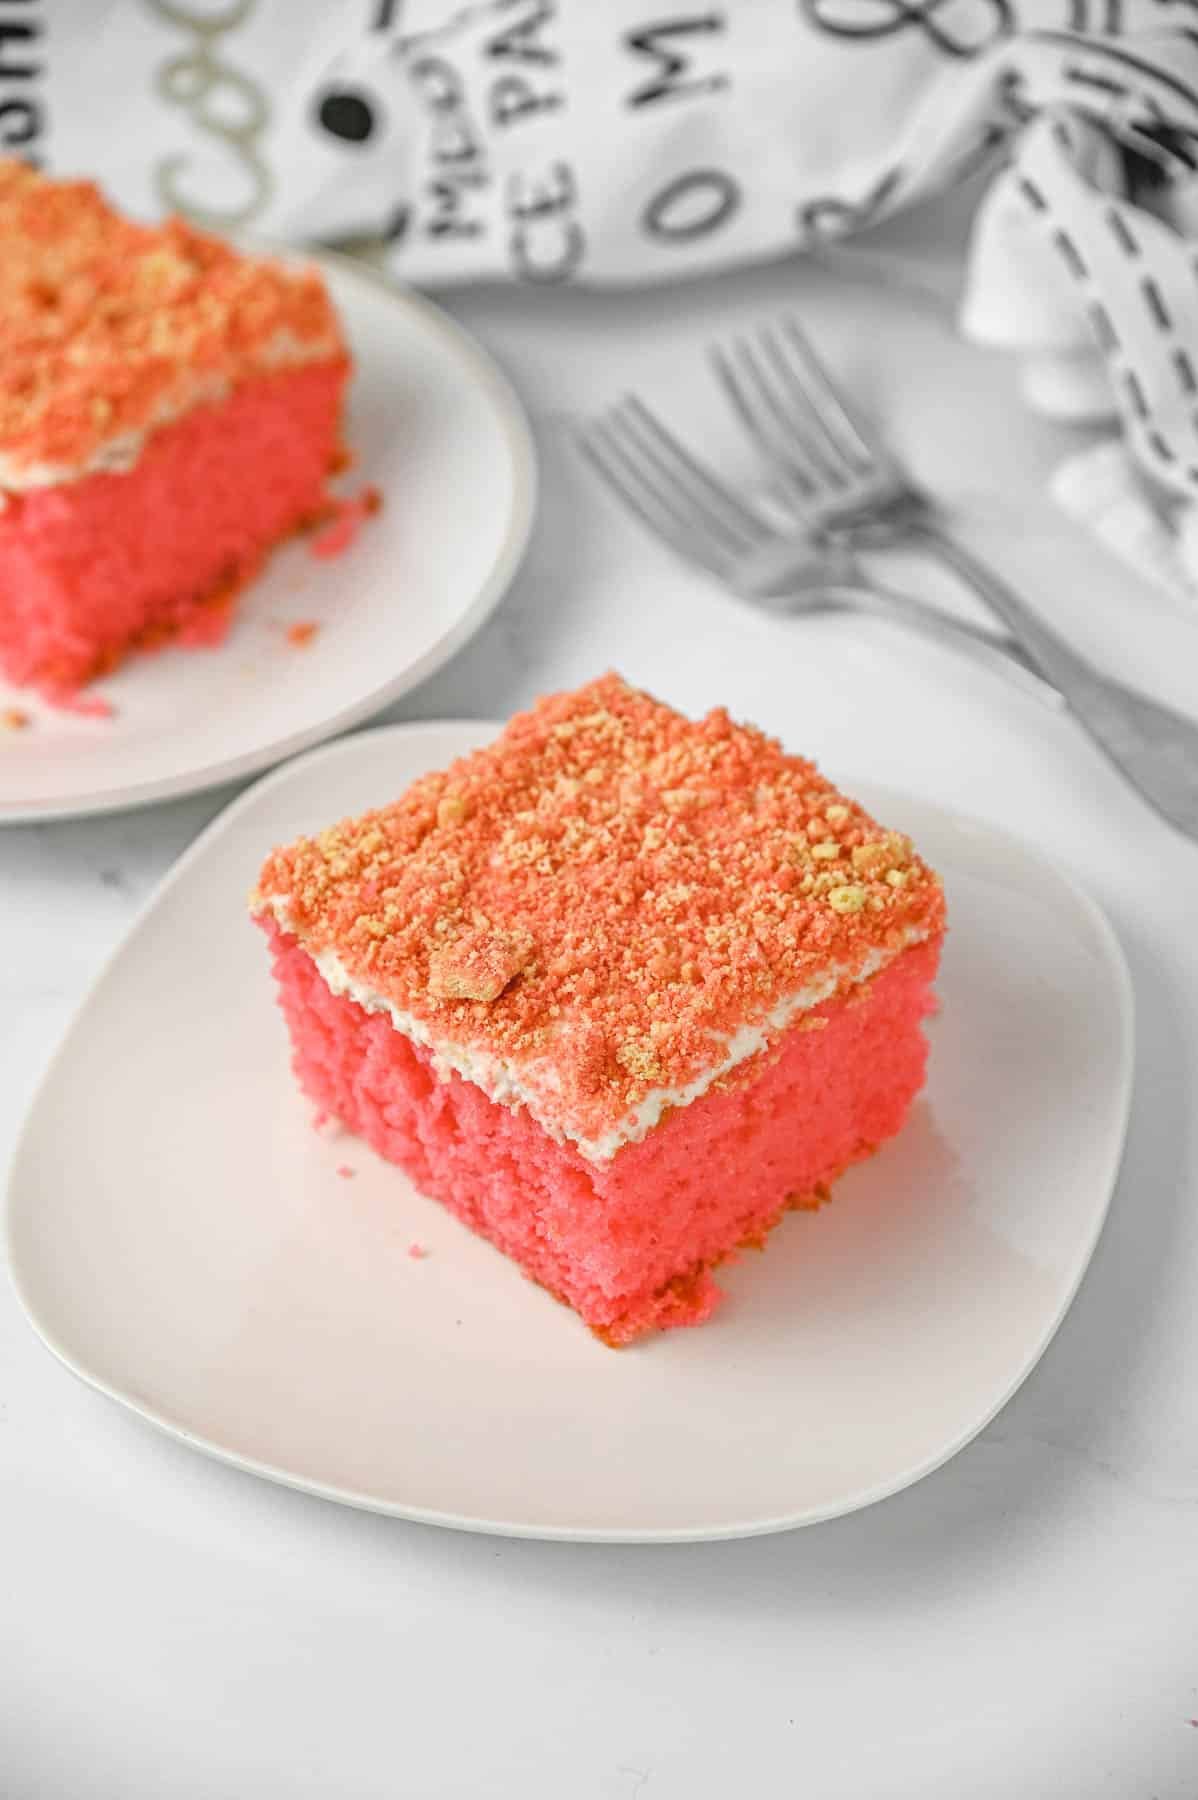 Slice of strawberry crunch cake on a white plate.